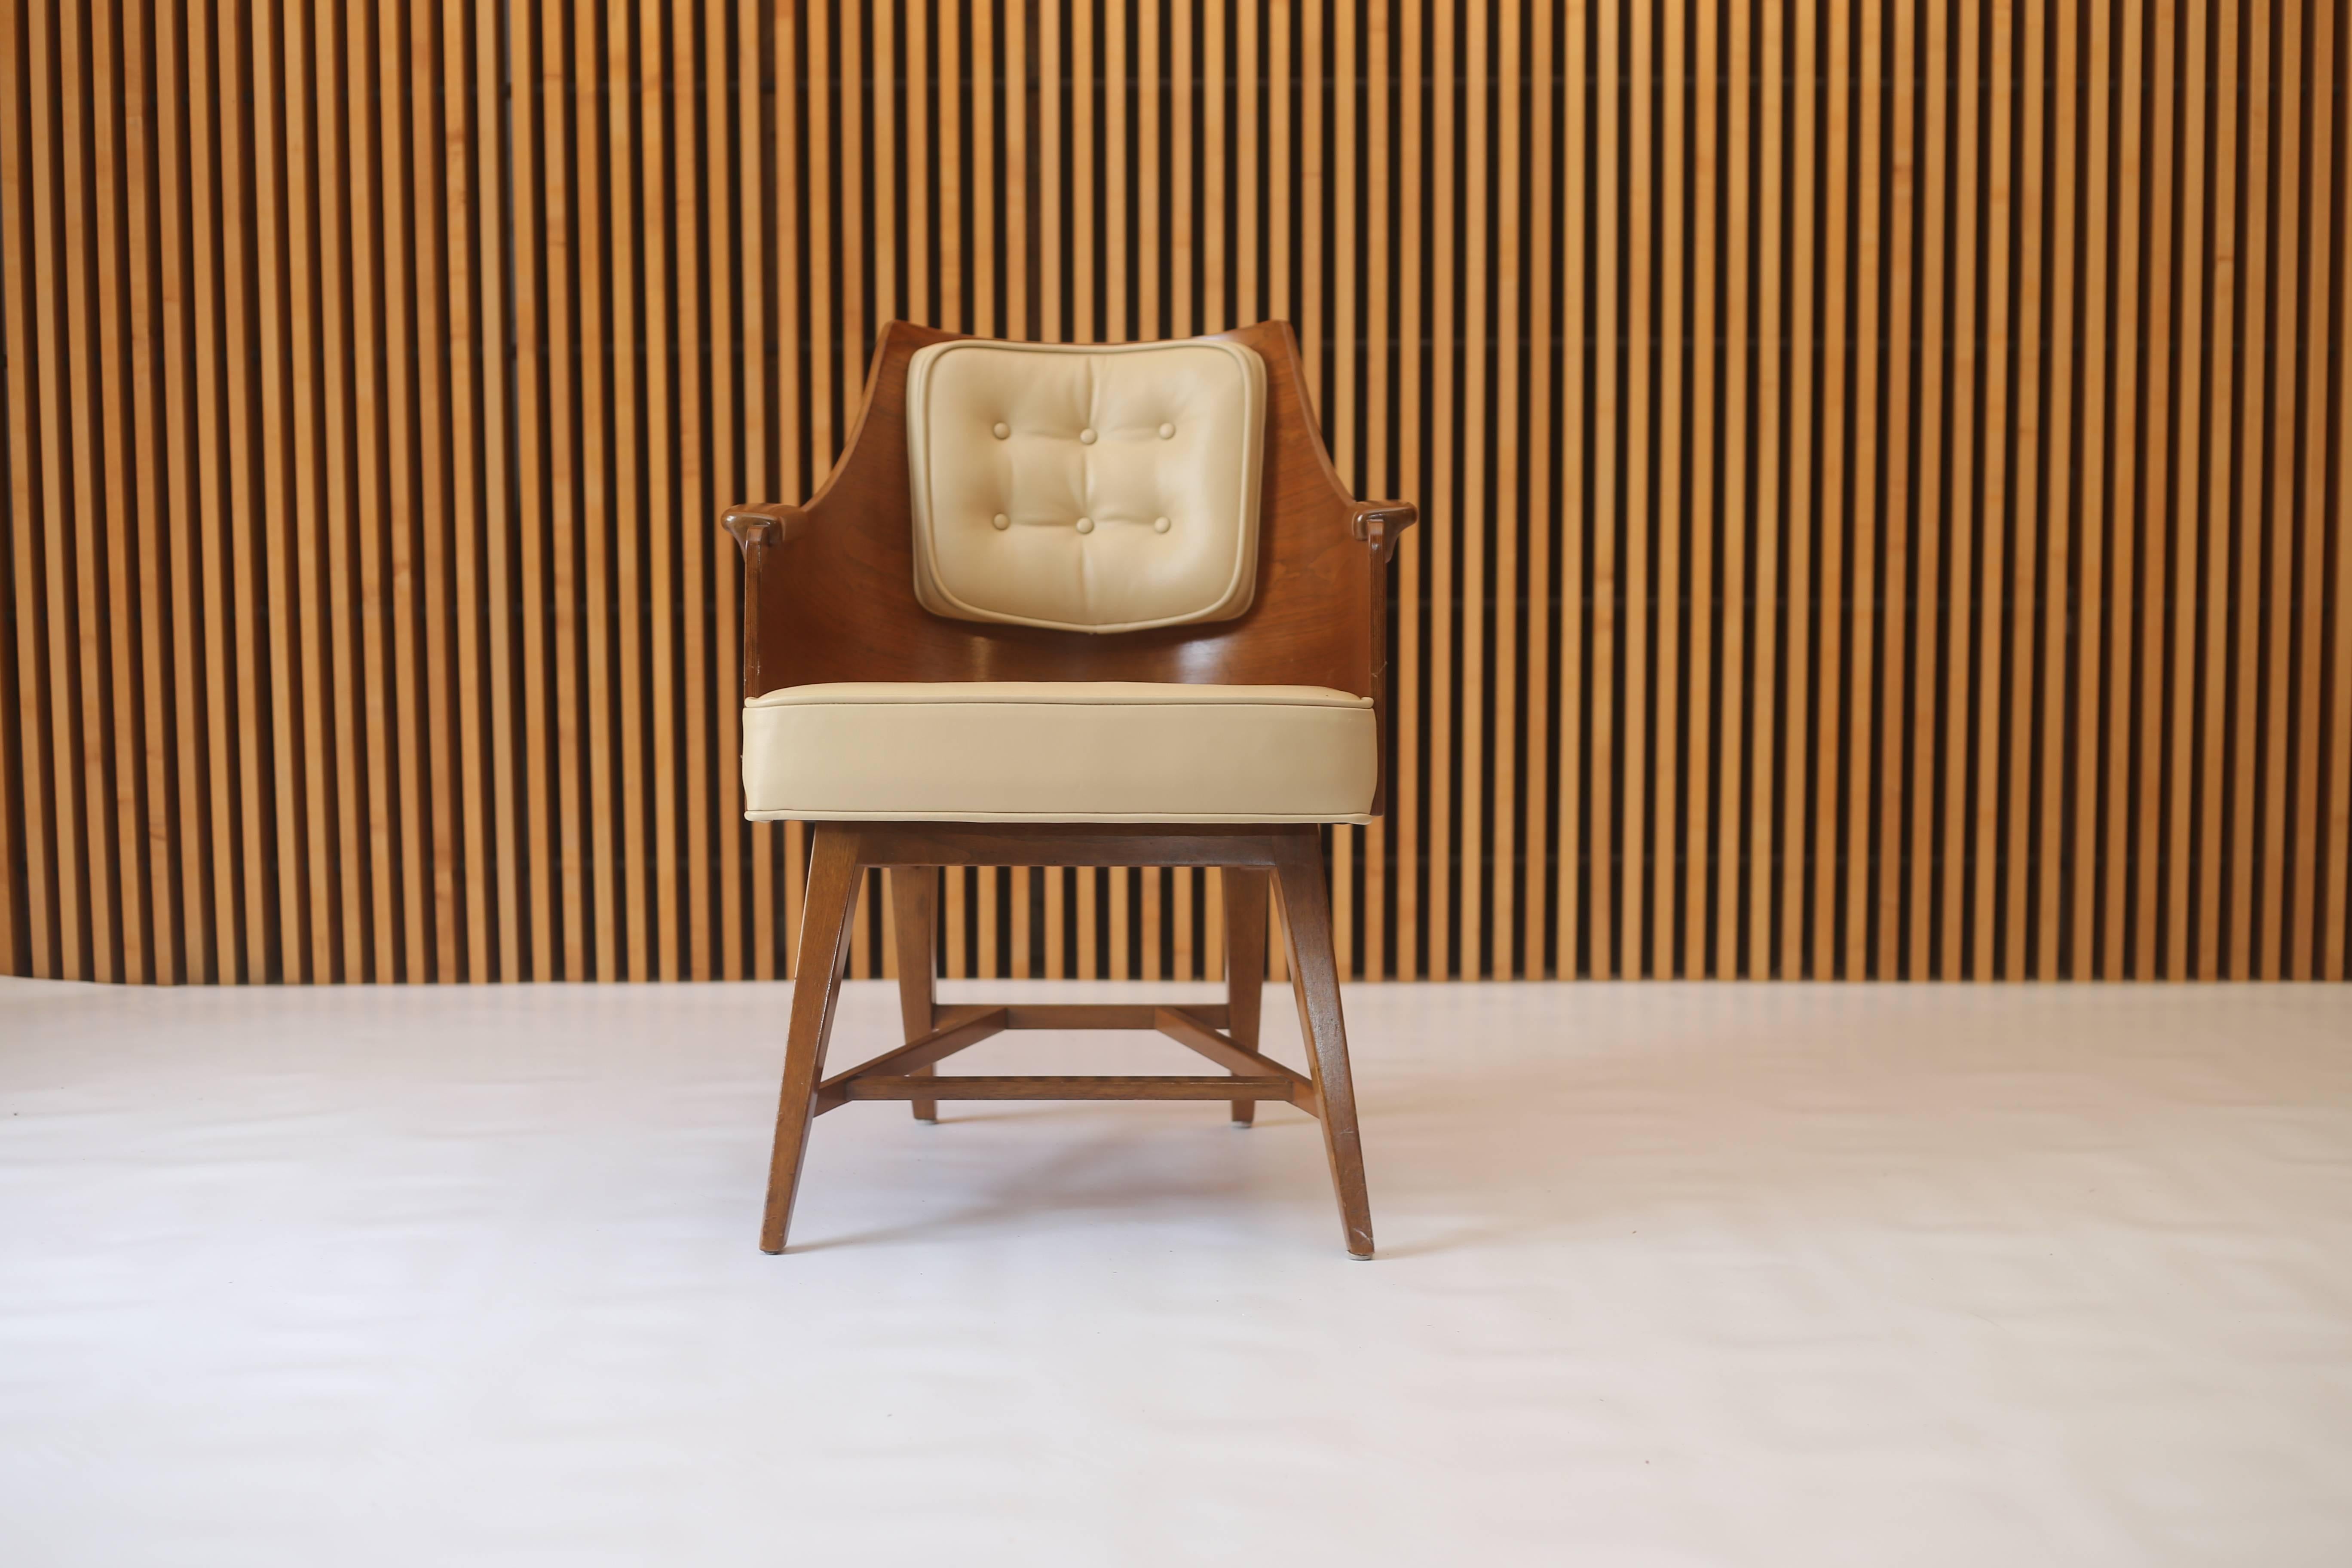 This model no. 5646 chair designed by Edward Wormley for Dunbar furniture consists of a walnut barrel back with solid paddle arms and was recently upholstered in a buttery beige edelman top grain leather. 

Dimensions:
23